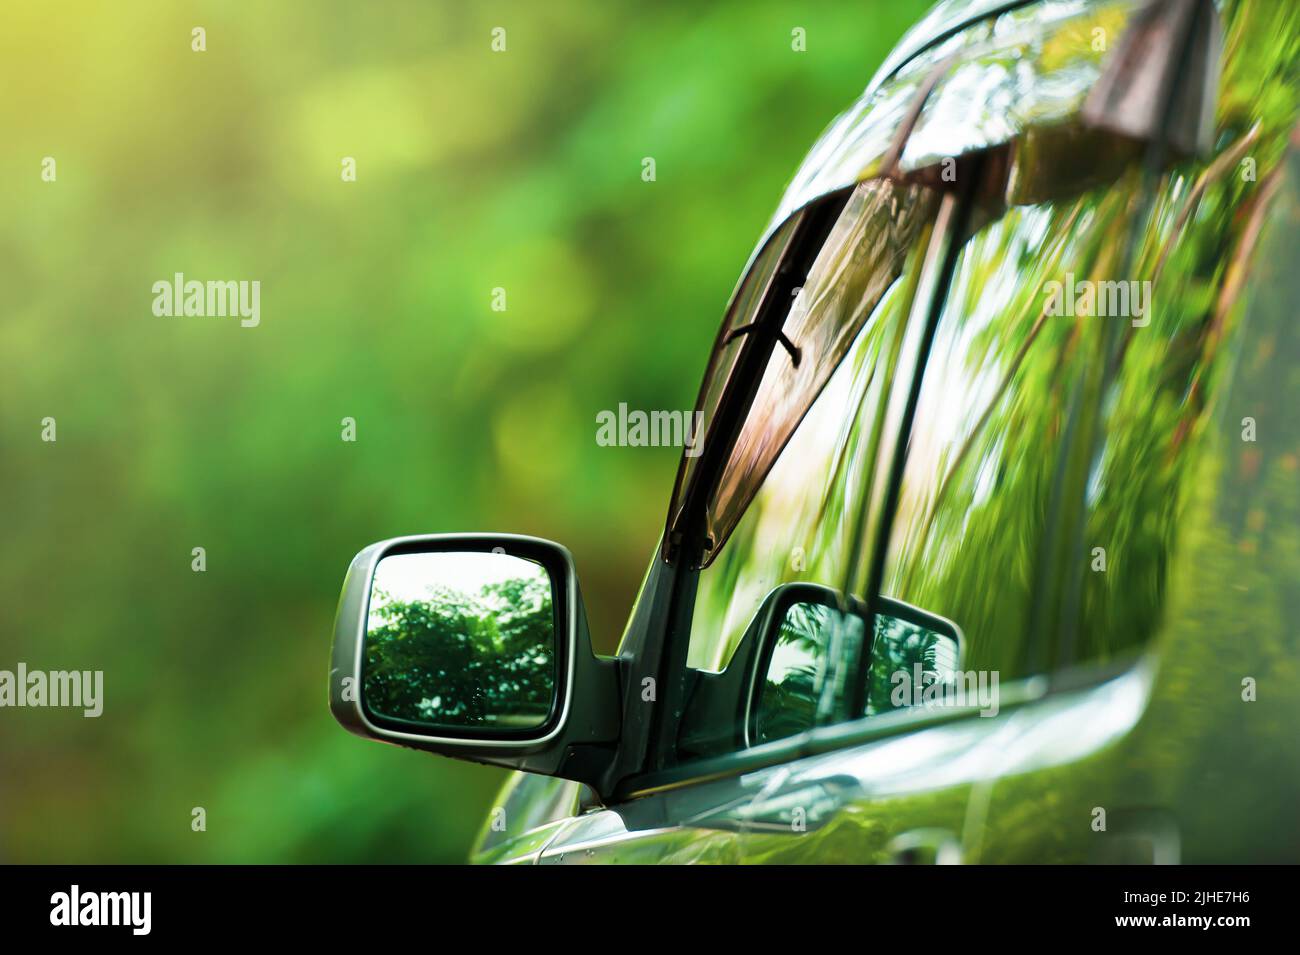 Rear view of a silver SUV car driving on a forest road, green trees reflected on the mirror, green forest blurred in the background. Road trip. Stock Photo